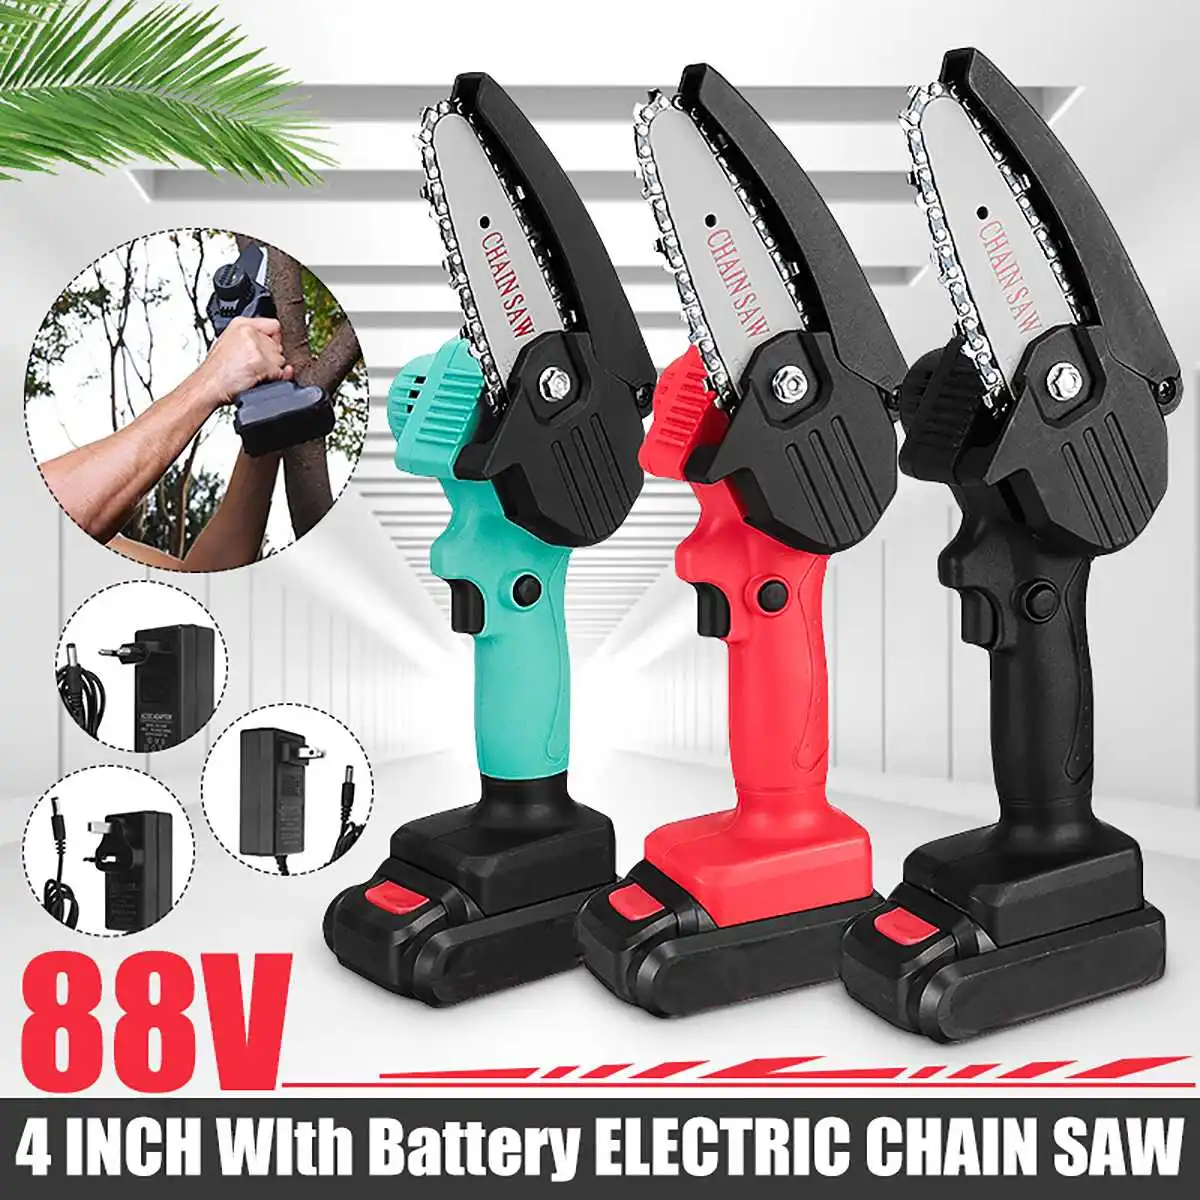 

88V Electric Mini Chain Saws Pruning ChainSaw Cordless Garden Tree Logging Trimming Saw For Wood Cutting With Lithium Battery